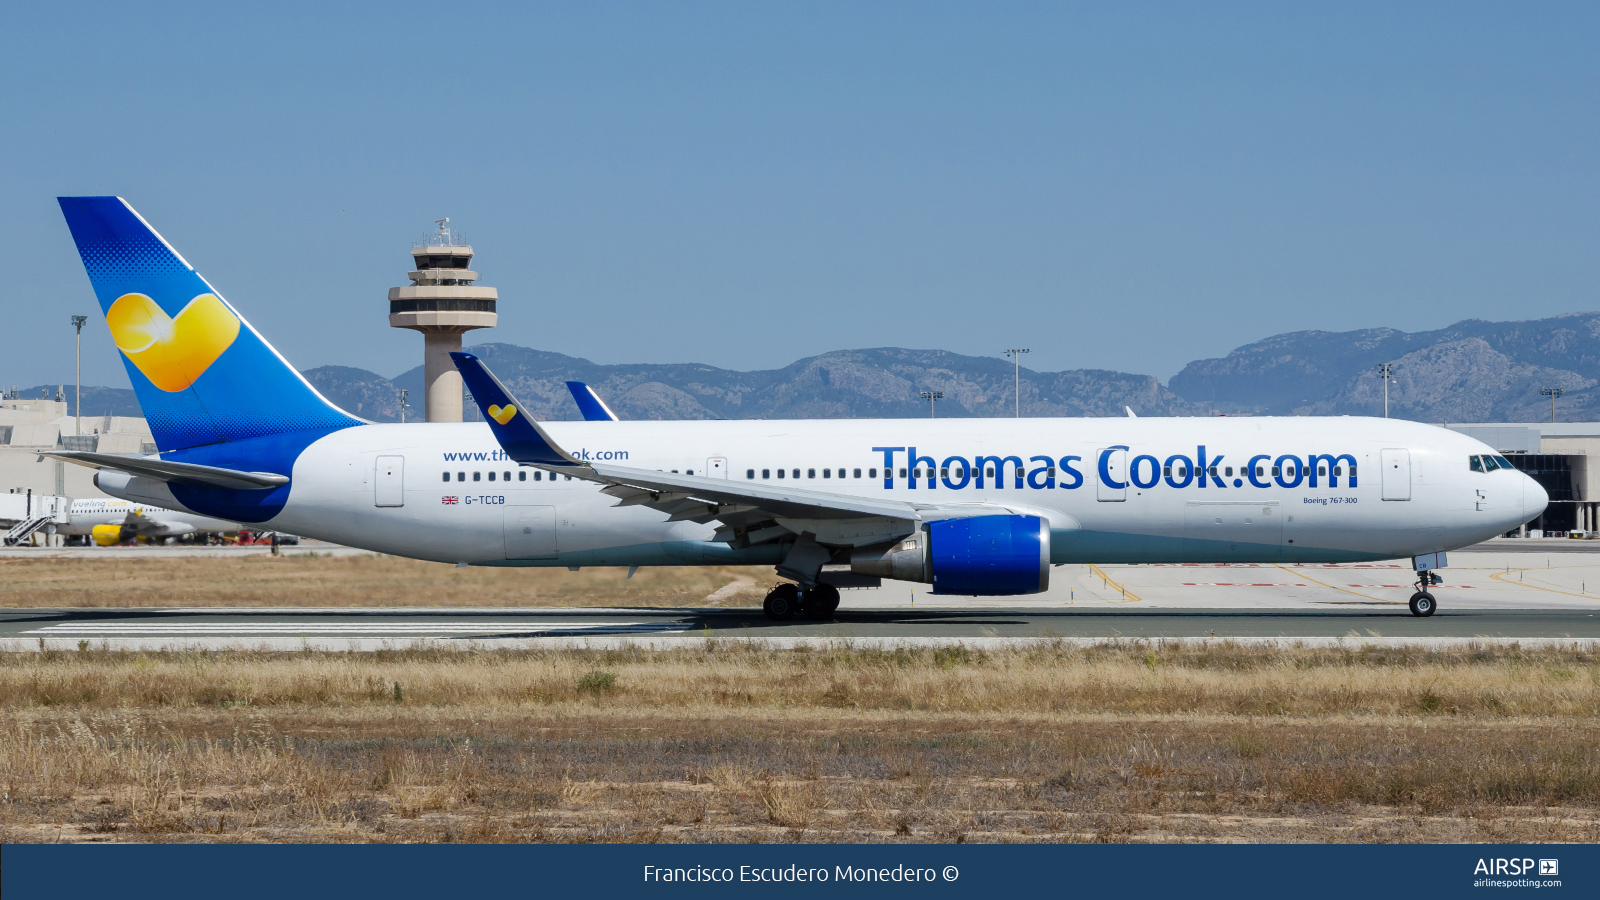 Thomas Cook Airlines  Boeing 767-300  G-TCCB